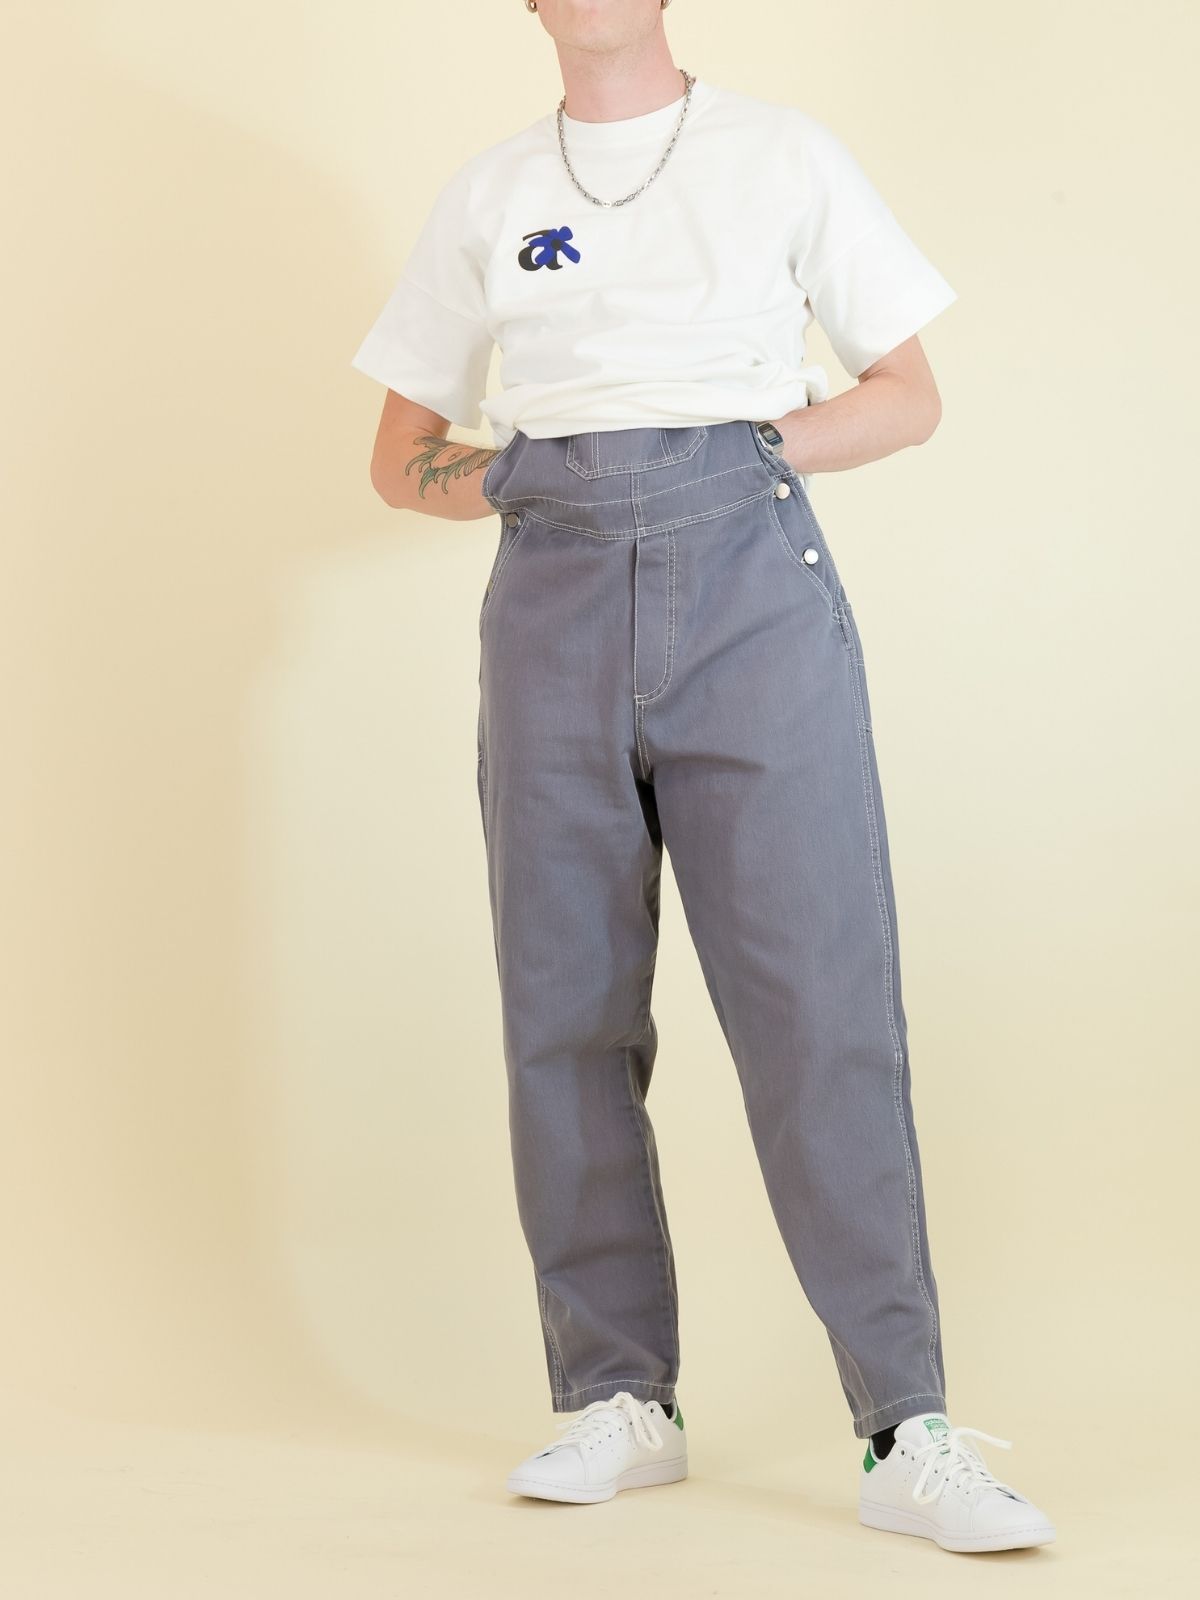 Mileage Topstitched Grey Dungaree